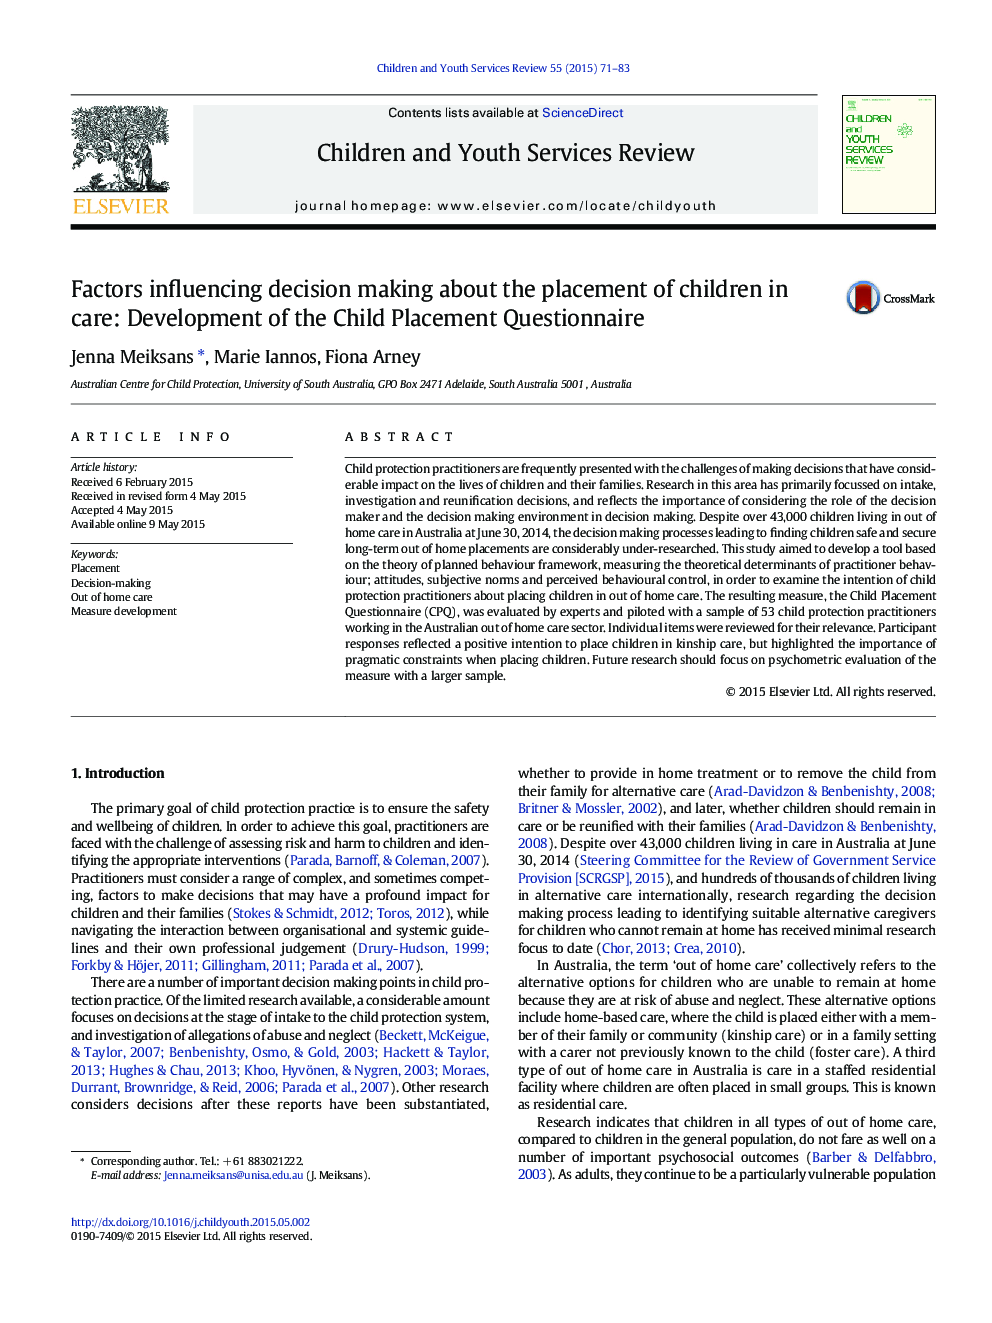 Factors influencing decision making about the placement of children in care: Development of the Child Placement Questionnaire